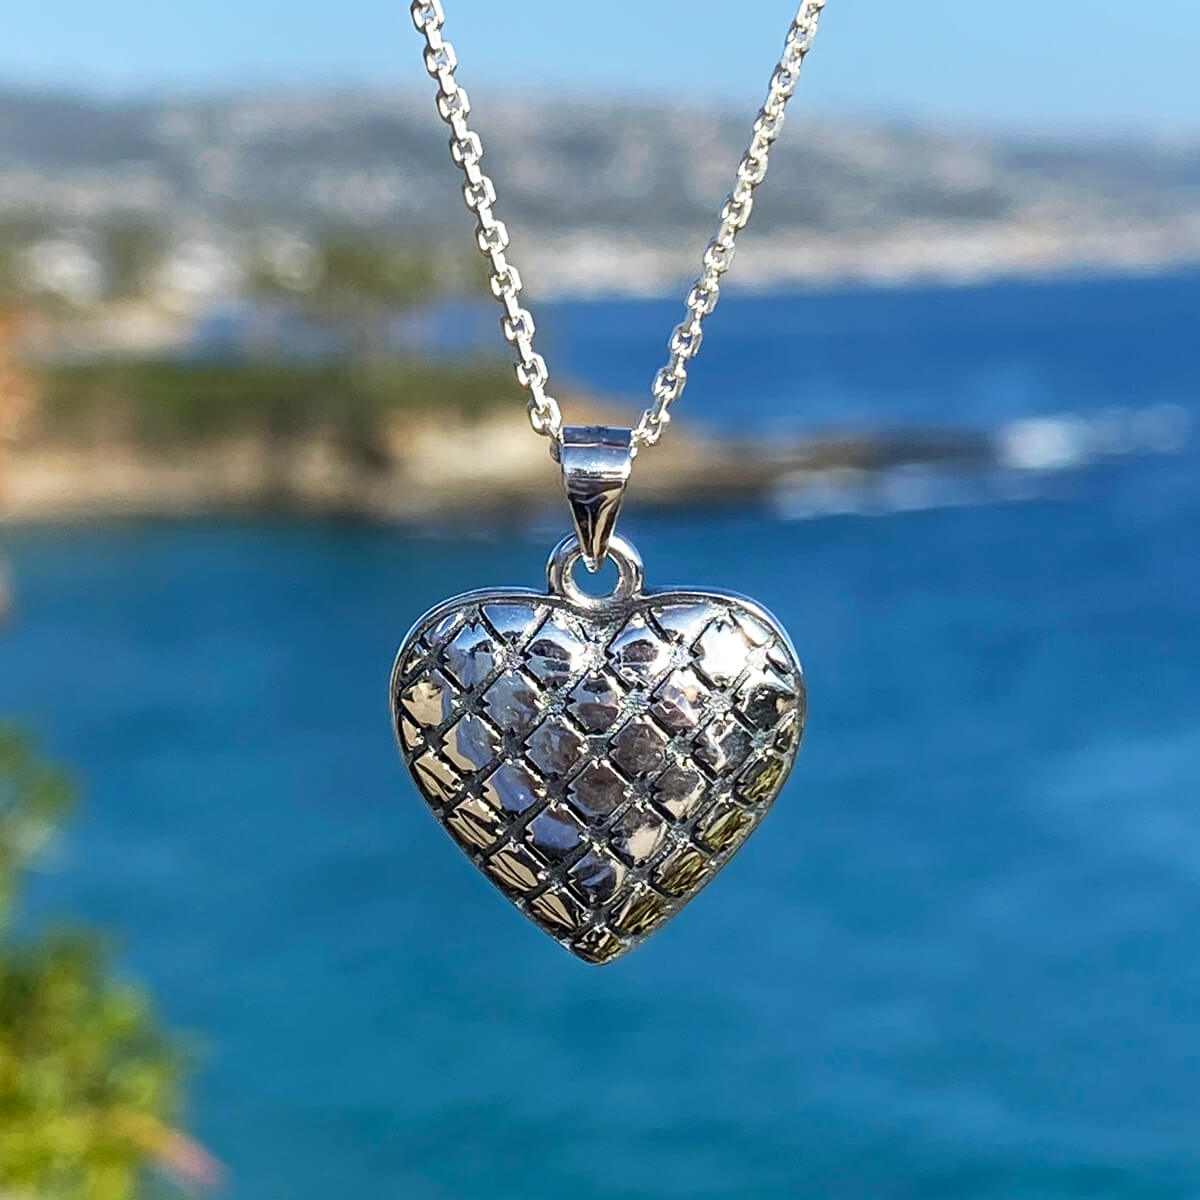 Heart Necklace Sterling Silver Jewelry